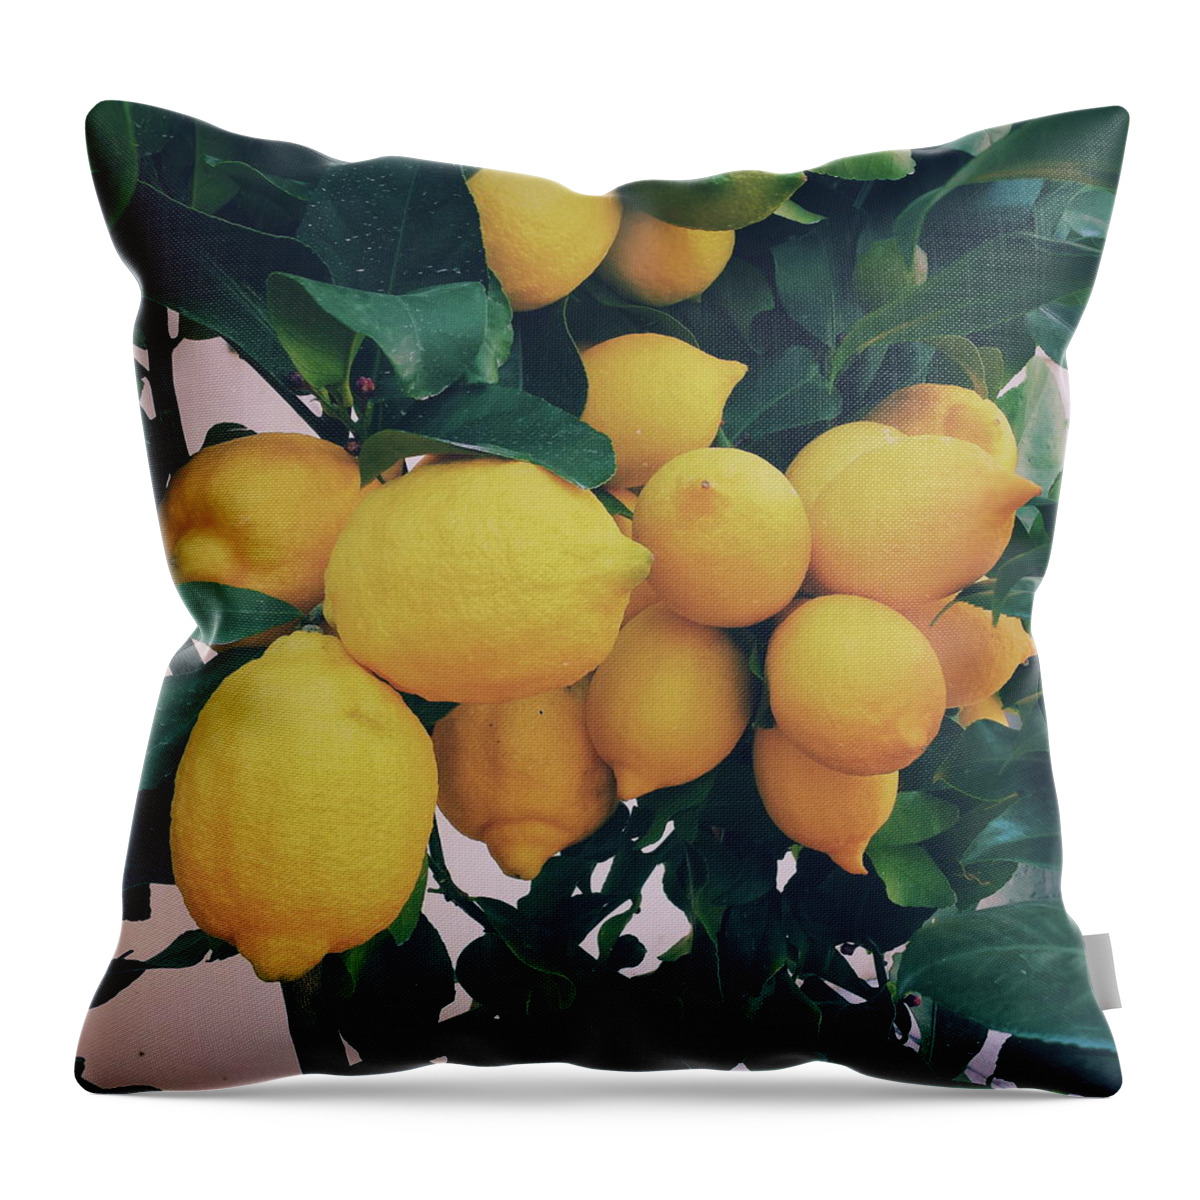 Lemon Throw Pillow featuring the photograph Lemon Tree by Happy Home Artistry